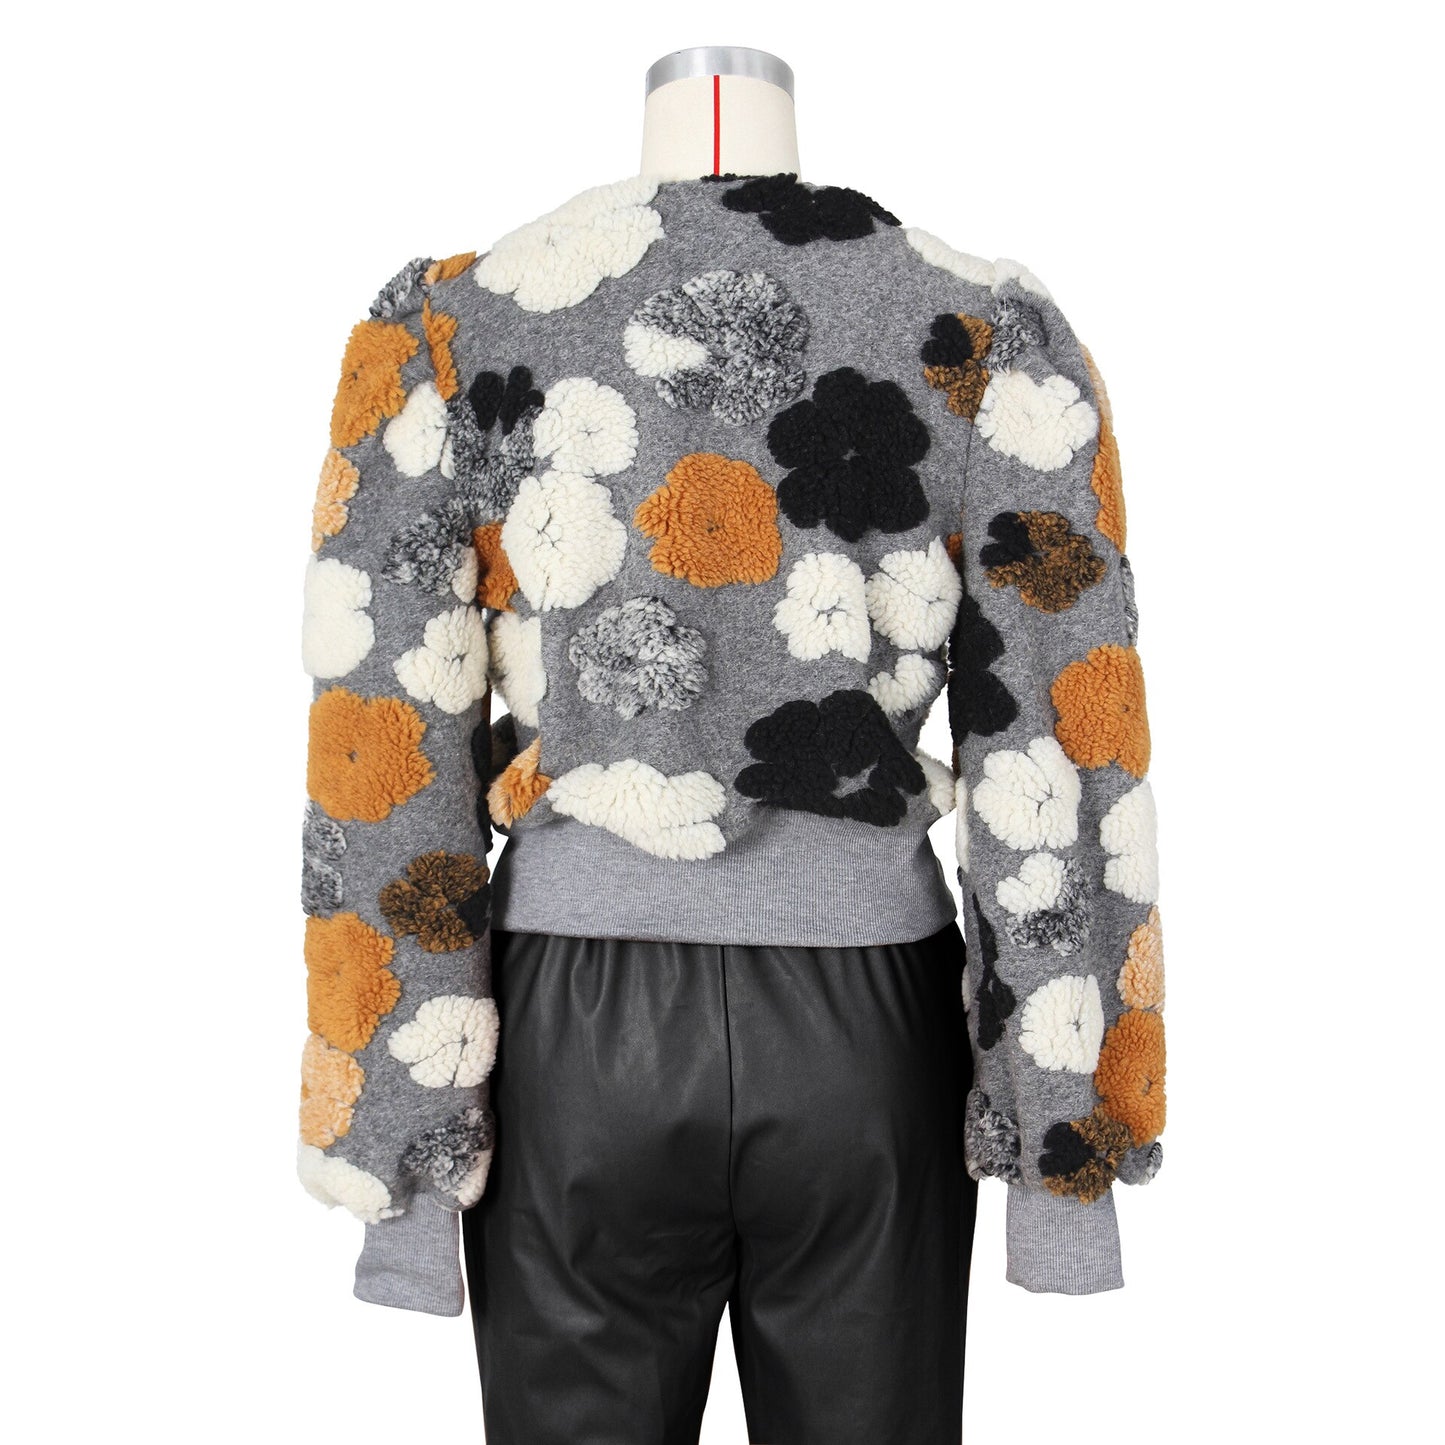 TEEK - Button Front Floral Touch Jacket JACKET theteekdotcom   